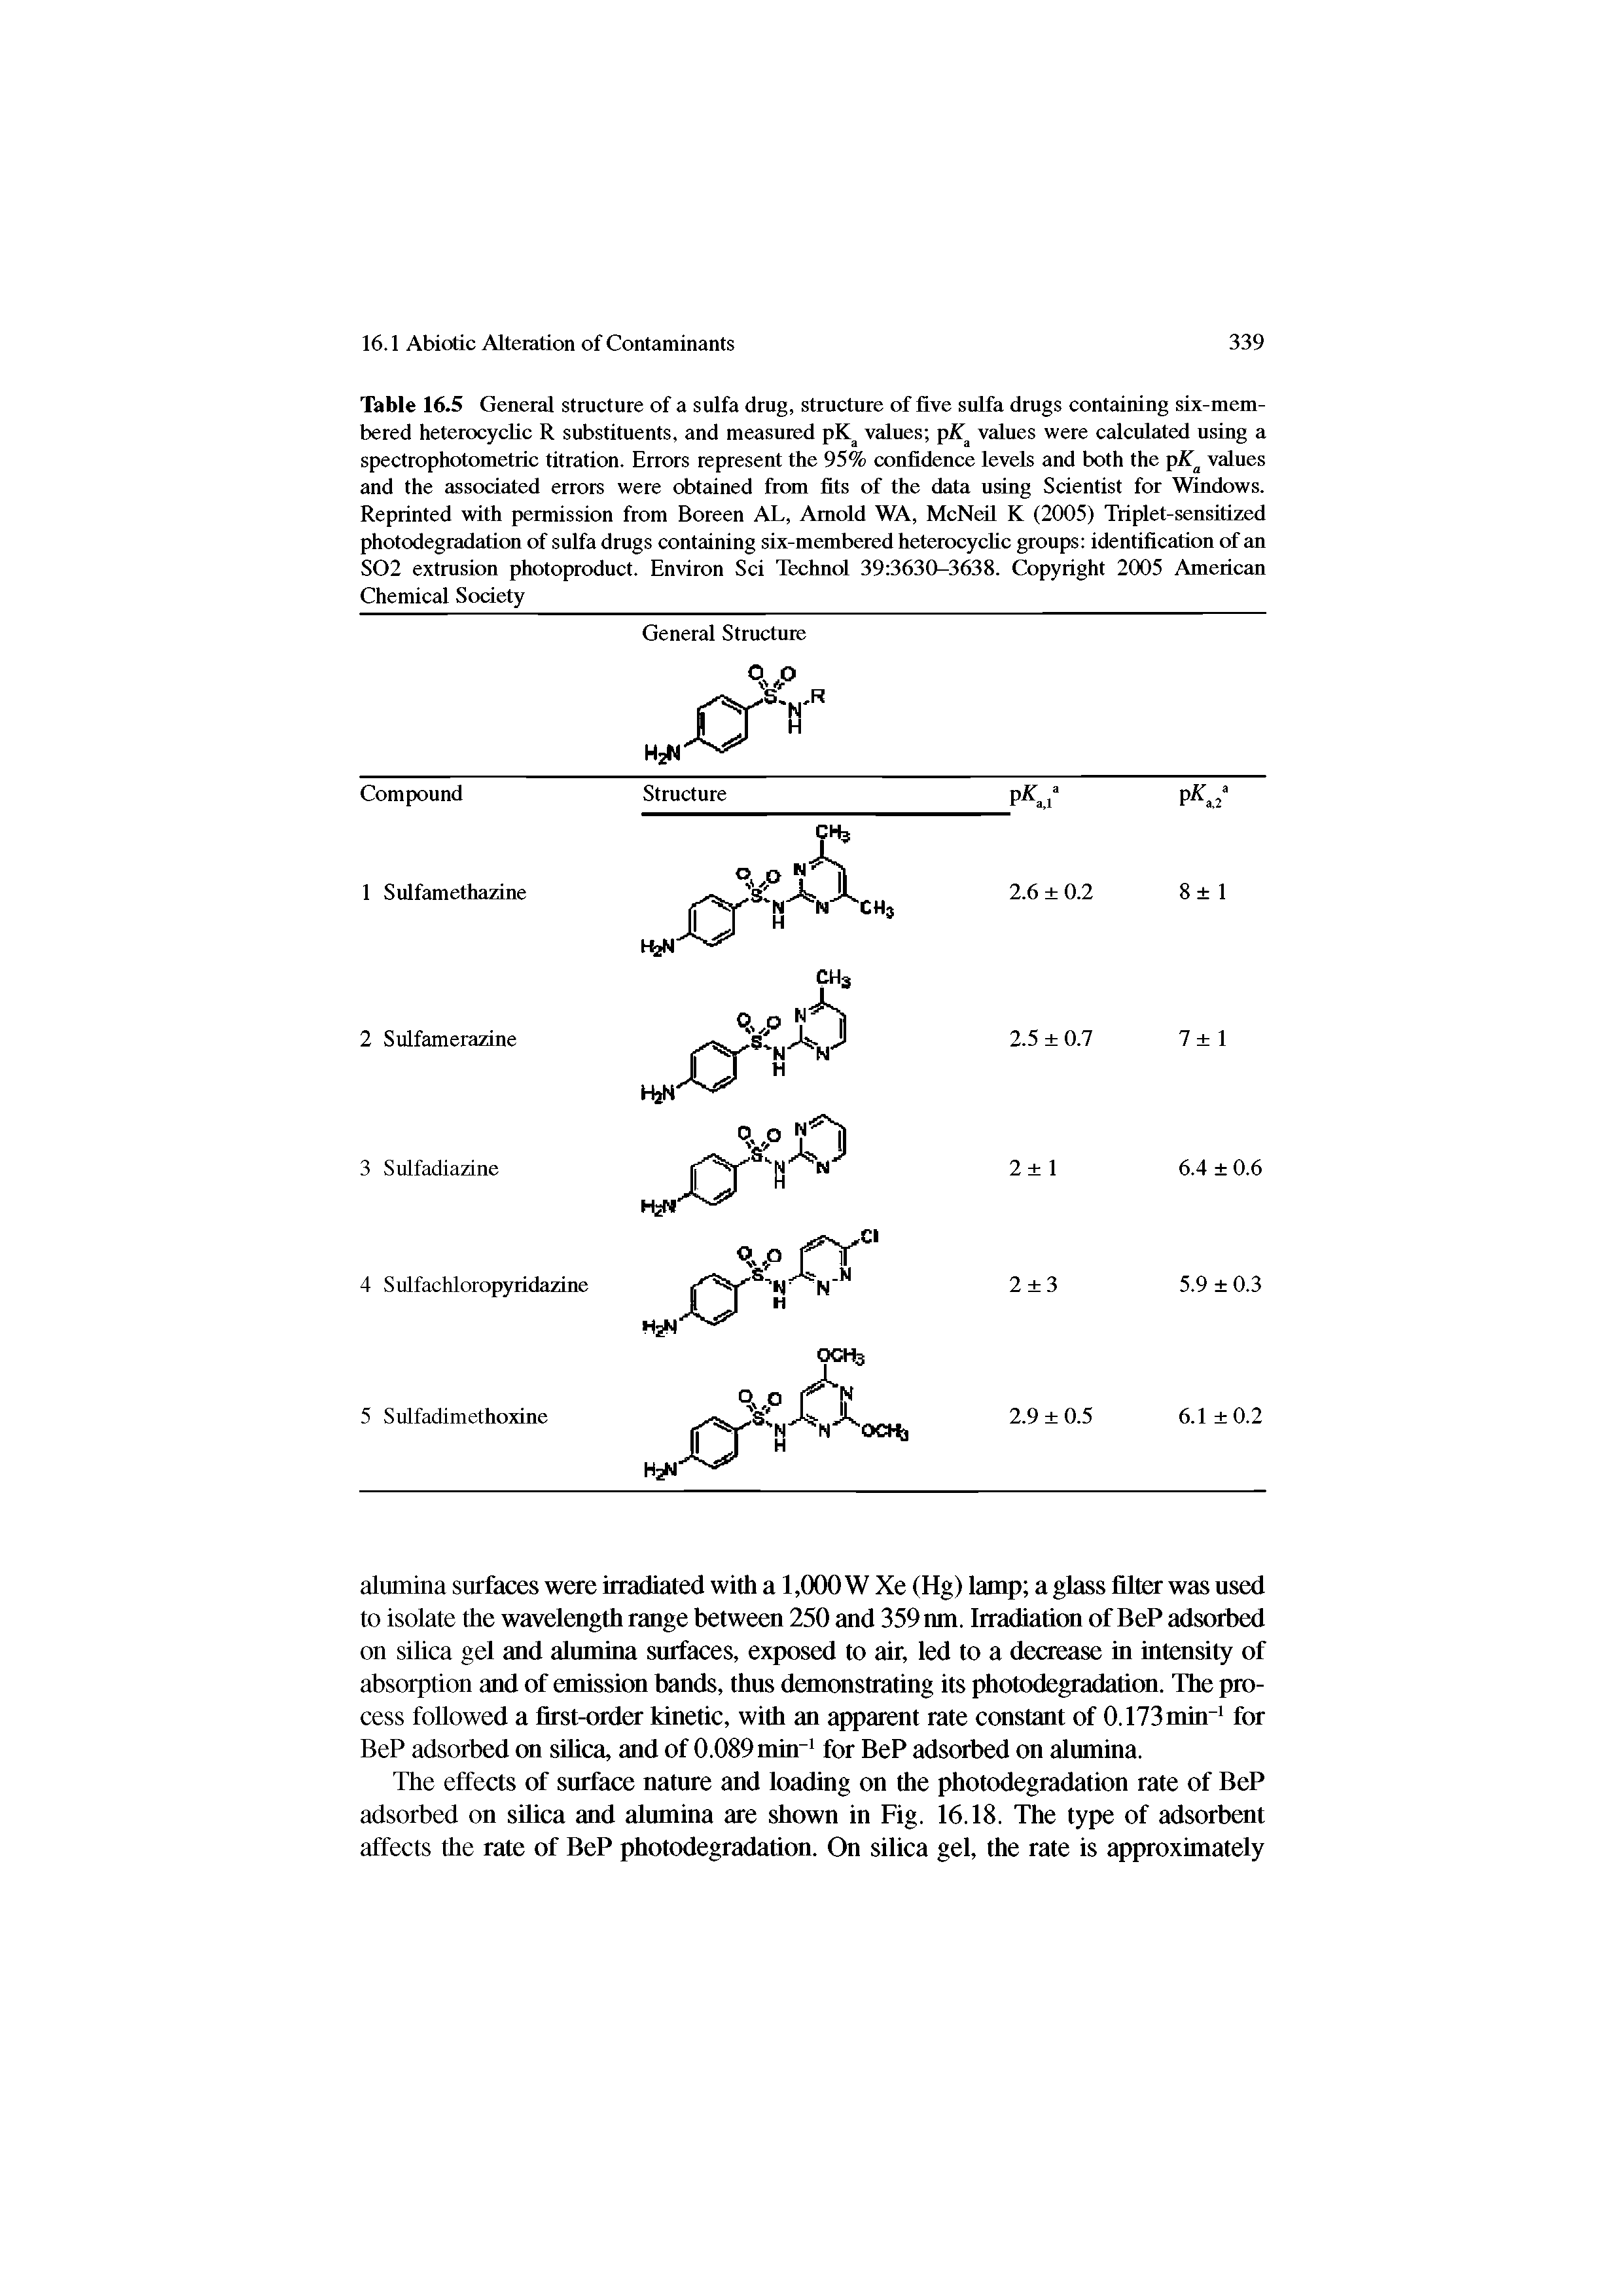 Table 16.5 General structure of a sulfa drug, structure of five sulfa drugs containing six-mem-bered heterocyclic R substituents, and measured pK values pK values were calculated using a spectrophotometric titration. Errors represent the 95% confidence levels and both the values and the associated errors were obtained from fits of the data using Scientist for Windows. Reprinted with permission from Boreen AL, Arnold WA, McNeil K (2005) Triplet-sensitized photodegradation of sulfa drugs containing six-membered heterocyclic groups identification of an S02 extrusion photoproduct. Environ Sci Technol 39 3630-3638. Copyright 2005 American Chemical Society...